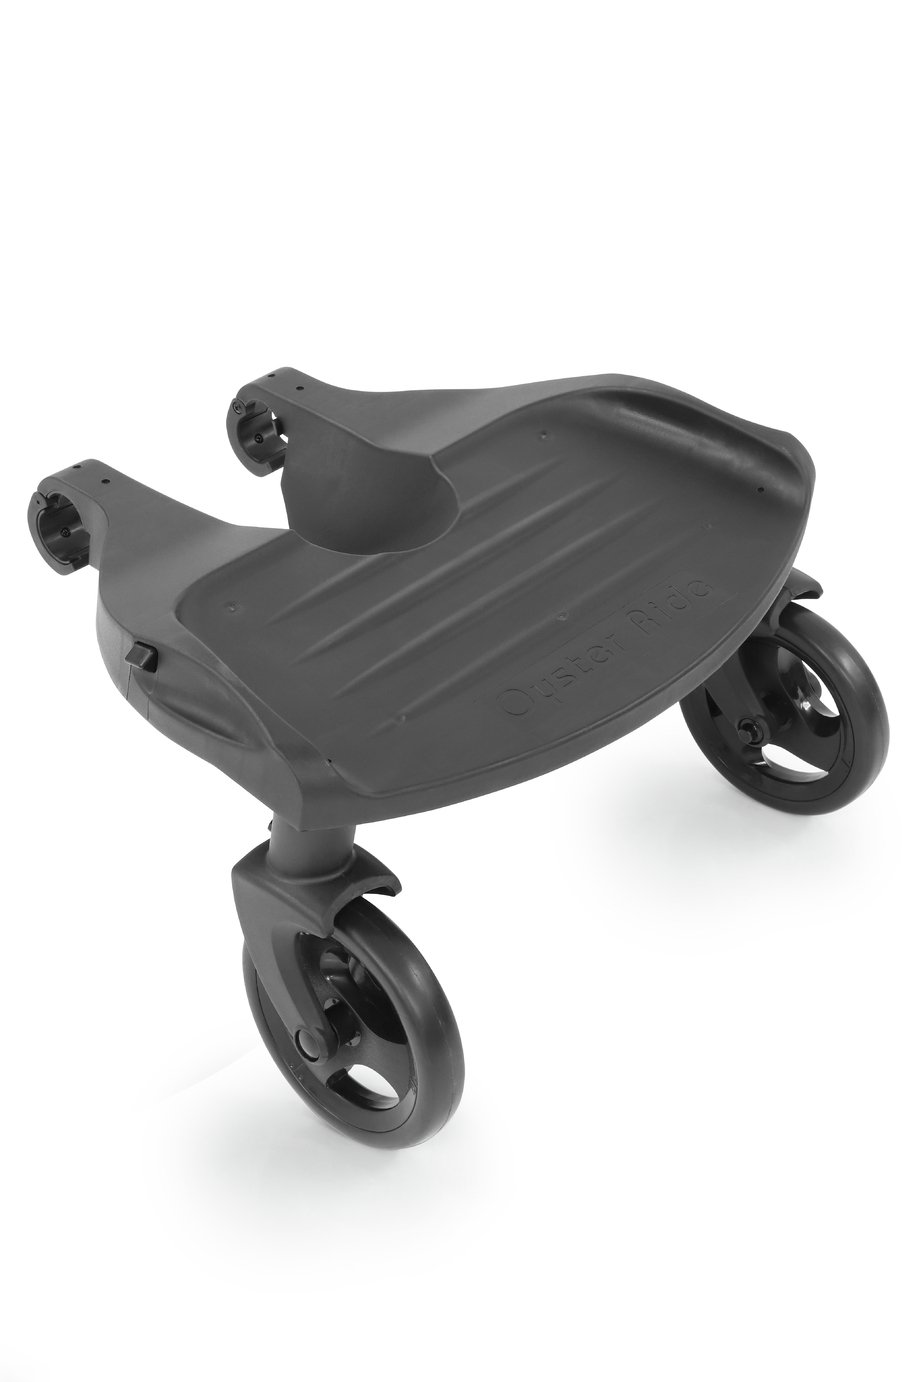 Oyster 3 Pushchair Ride On Board Review